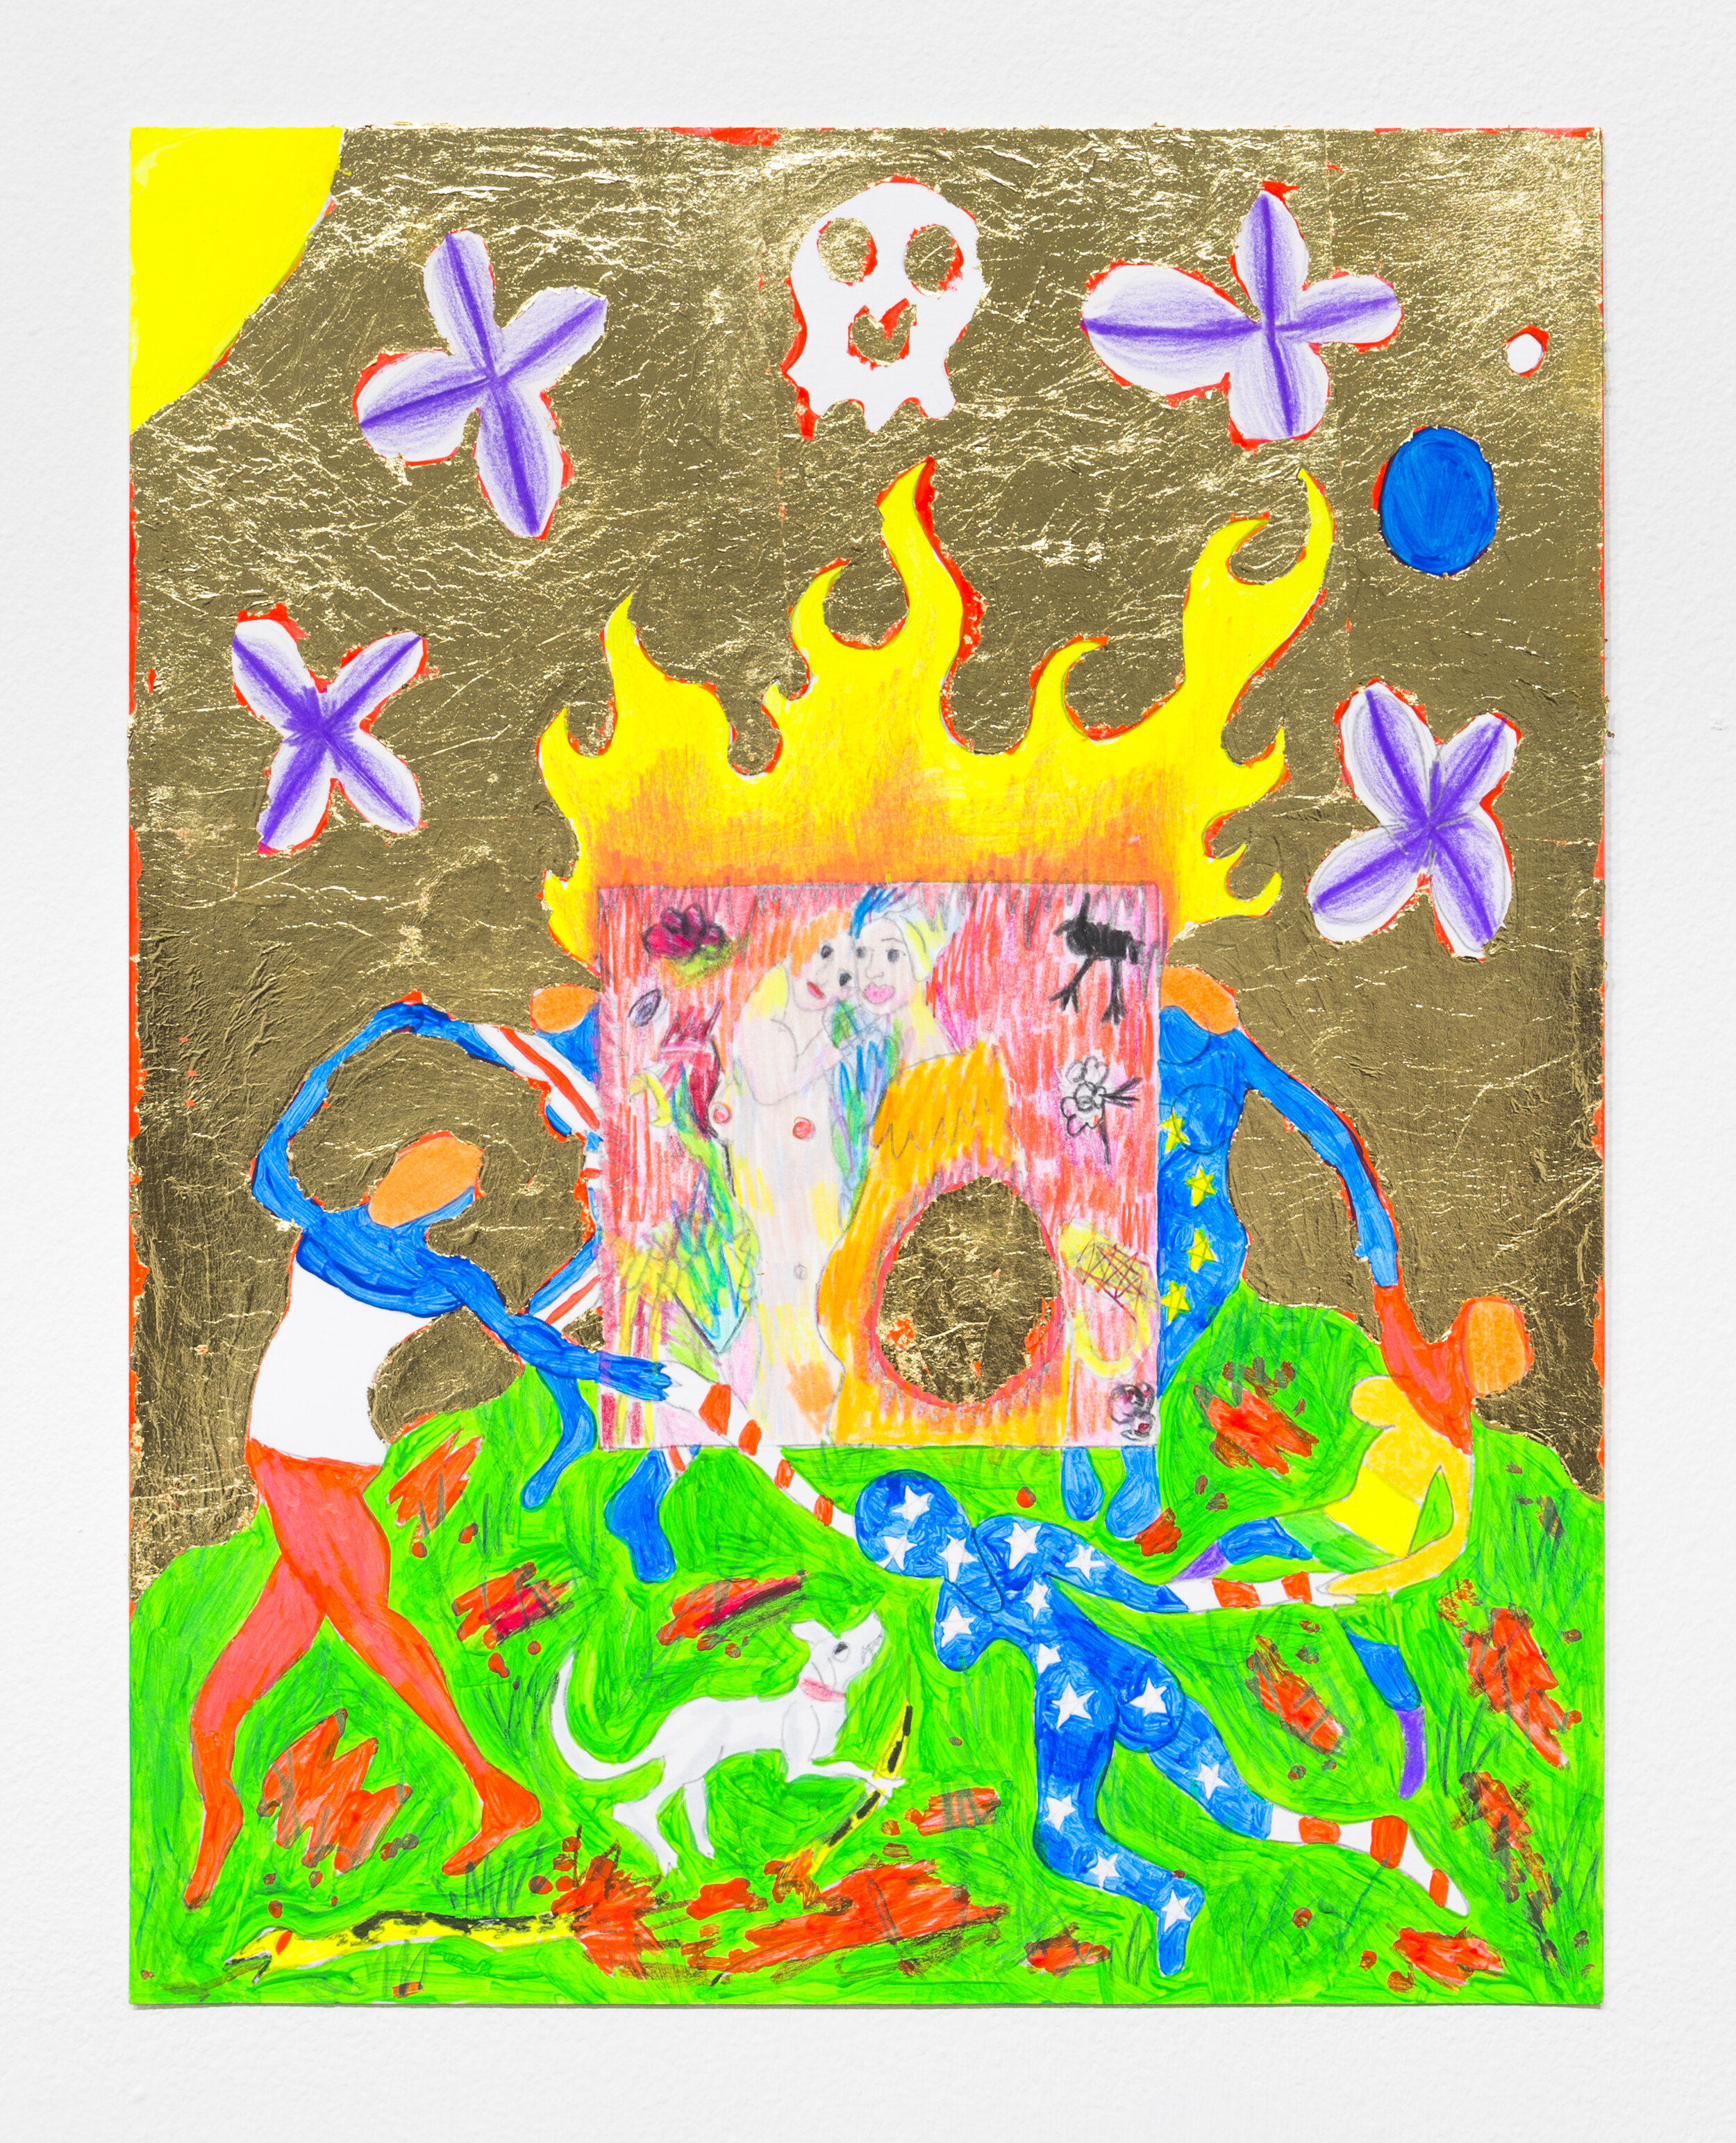   Burning Girlfriends with Lilac,  2018  14 x 11 inches (35.56 x 27.94 cm.)  Colored pencil, acrylic paint, and gold leaf on paper 